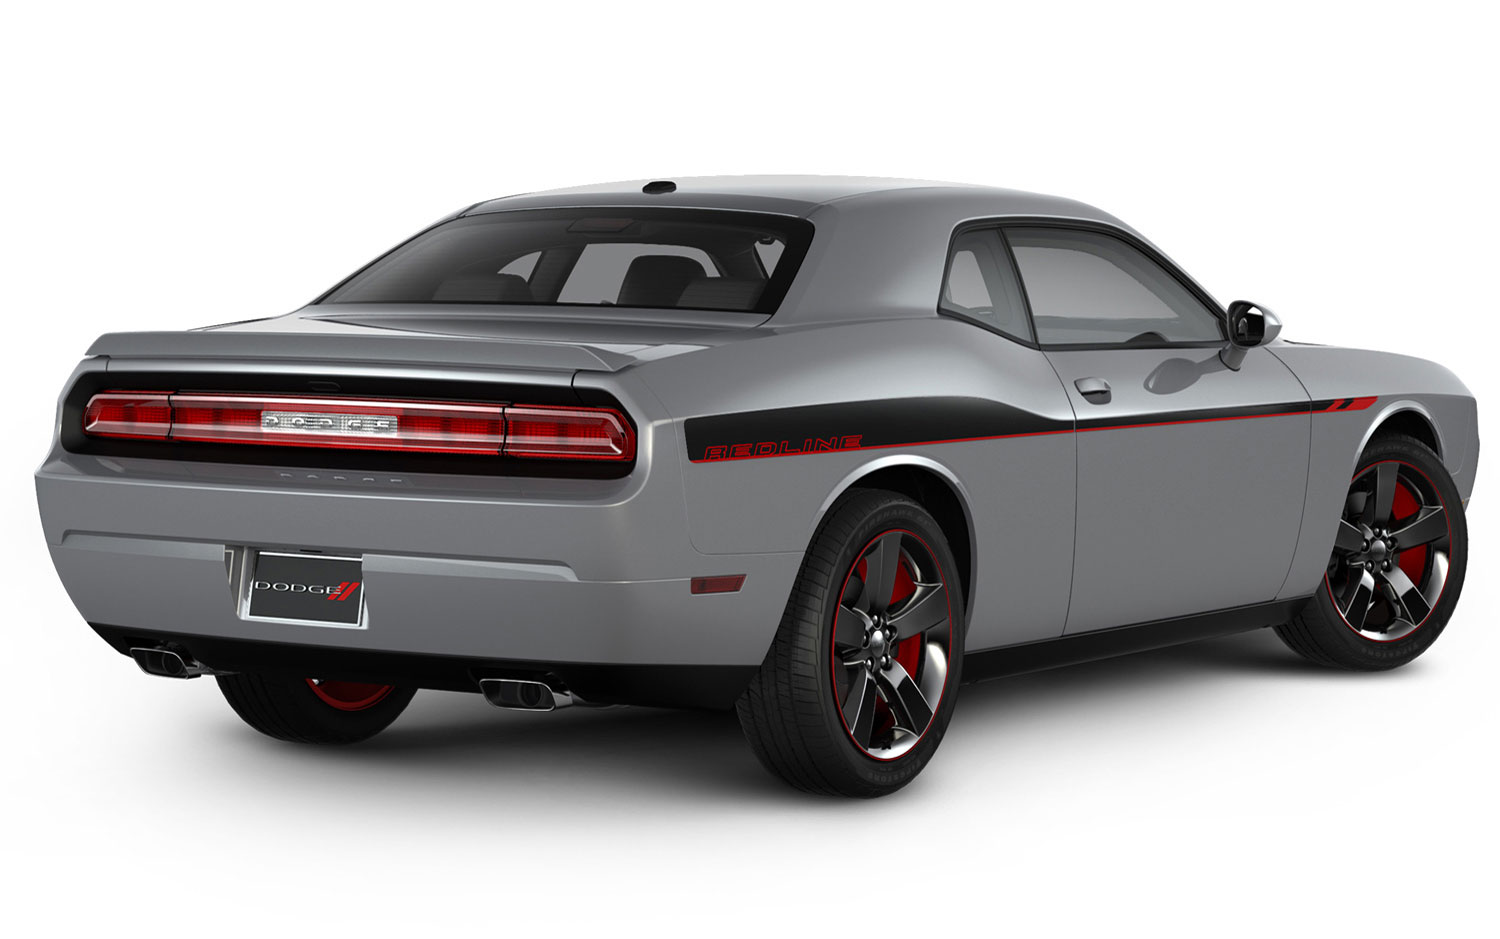 2014 Dodge Challenger Barracuda Photo Picture Free Download